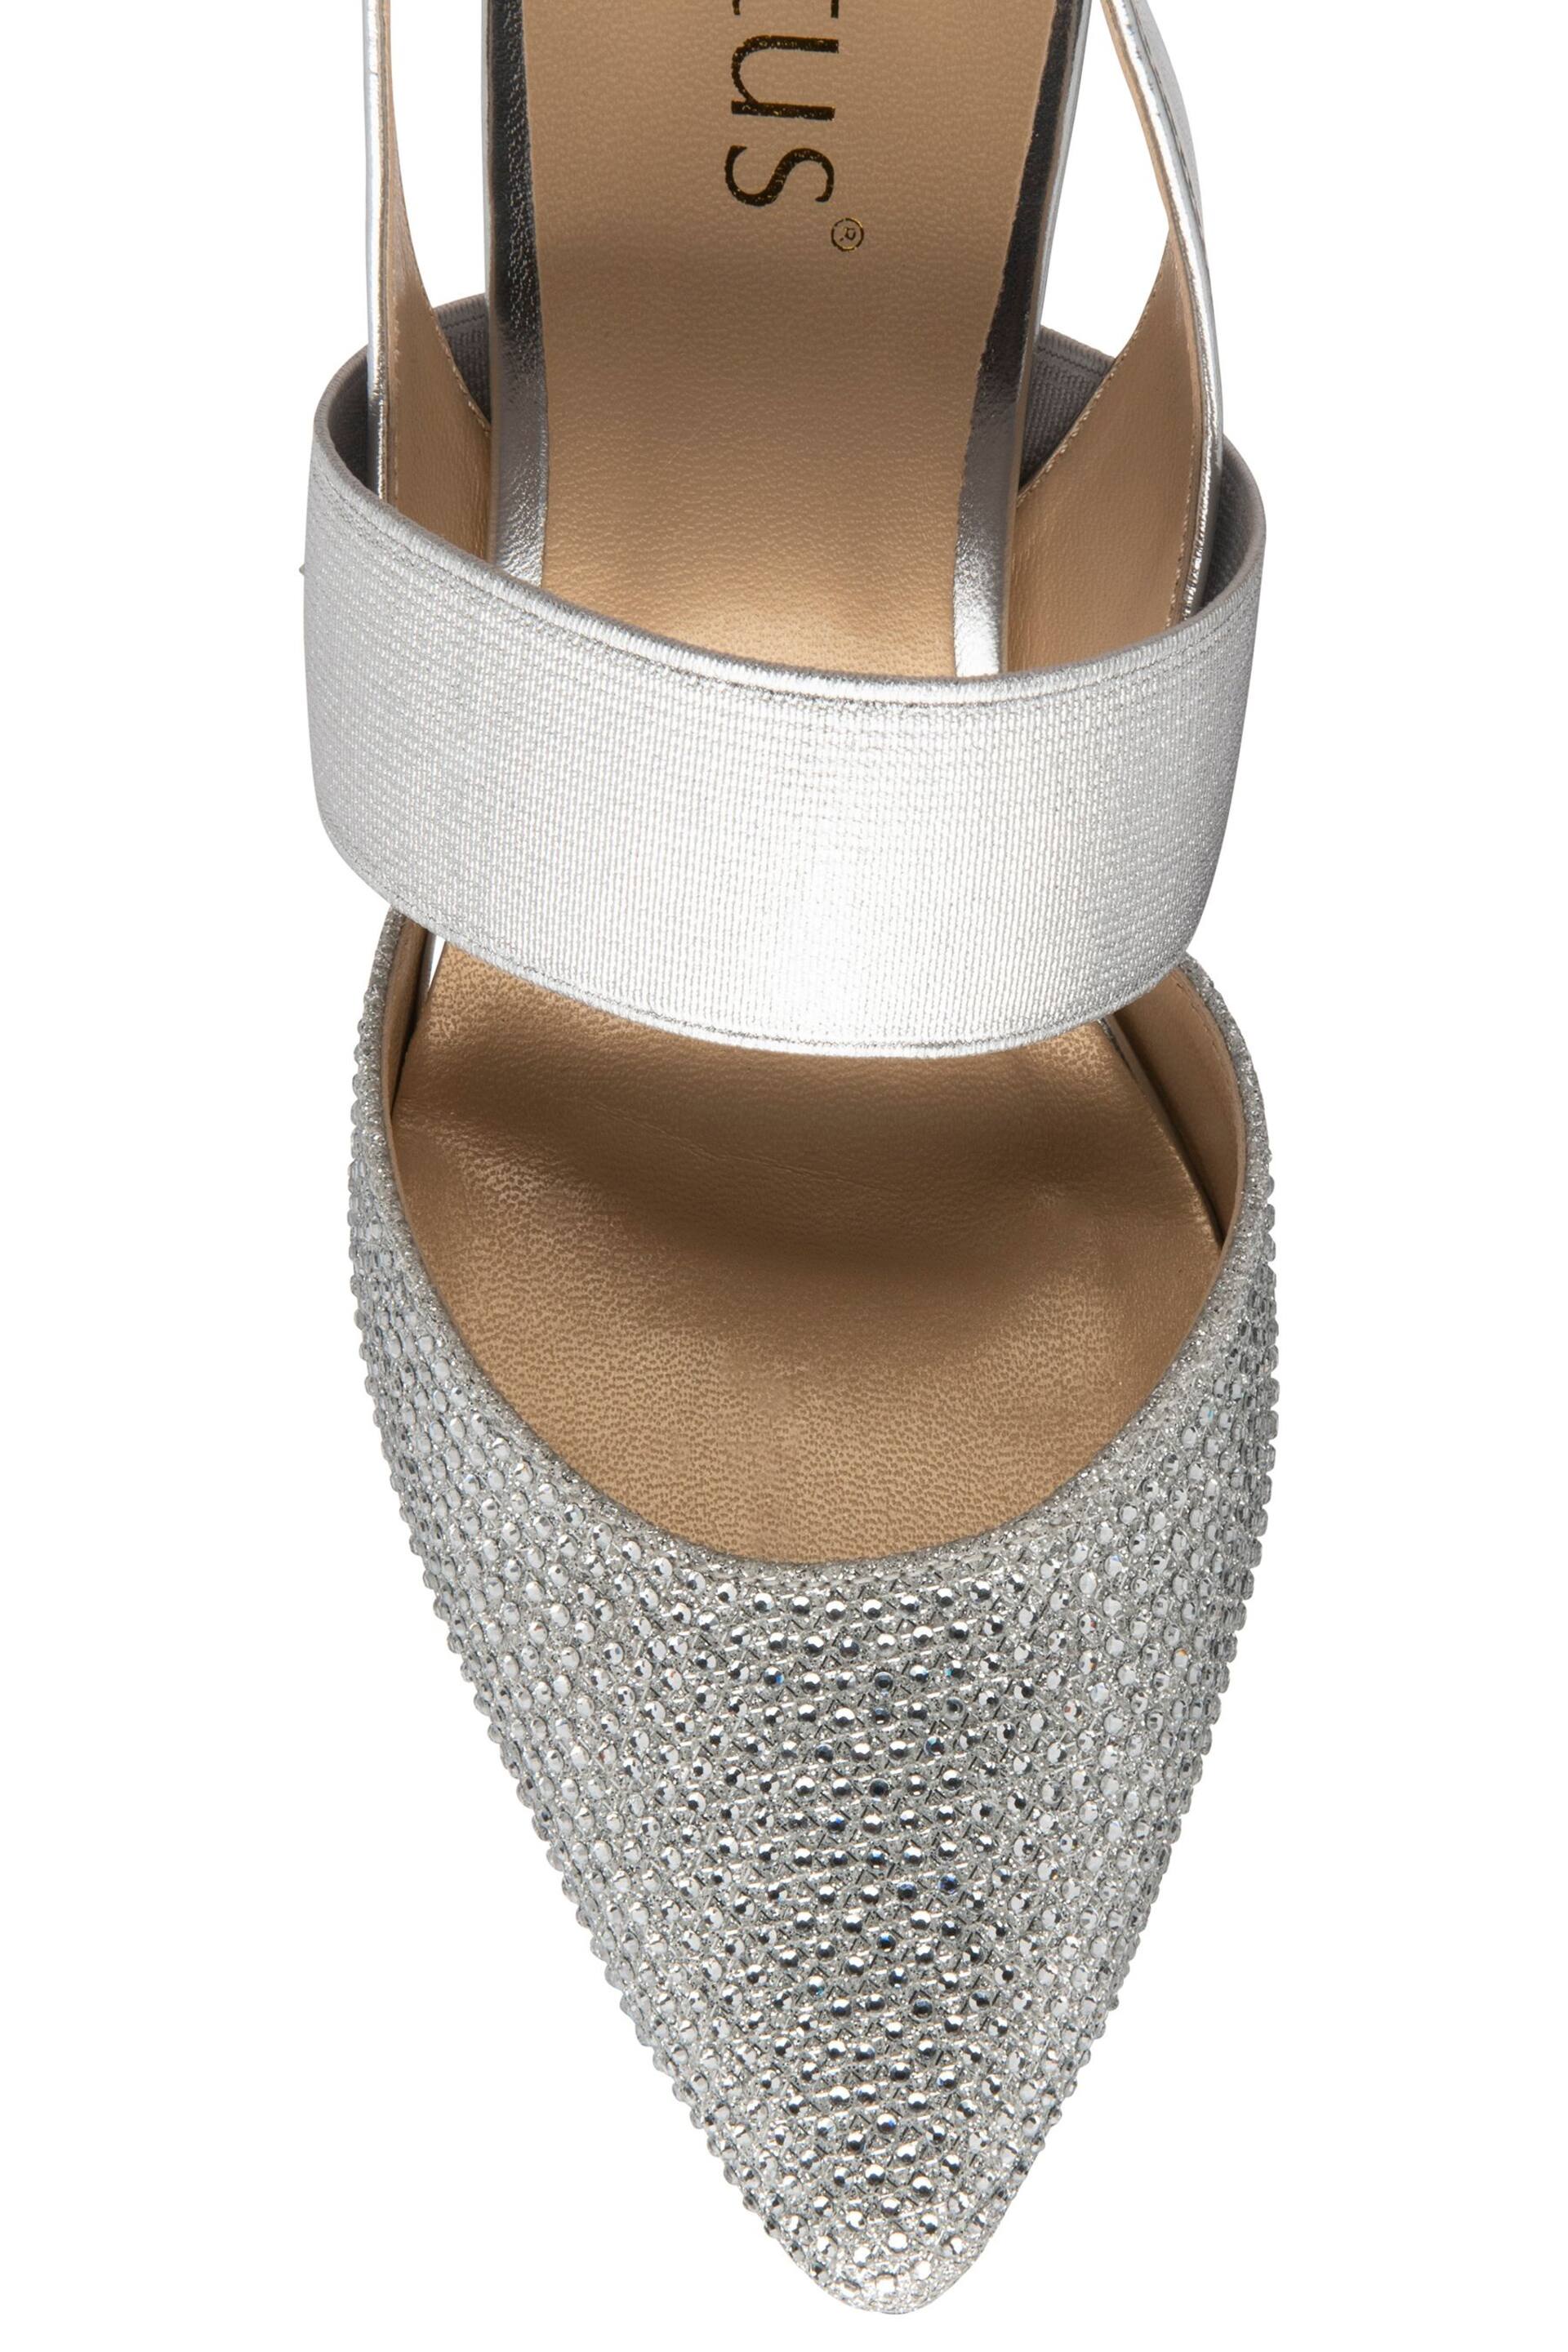 Lotus Silver/Gold Slingback Court Shoes - Image 4 of 4